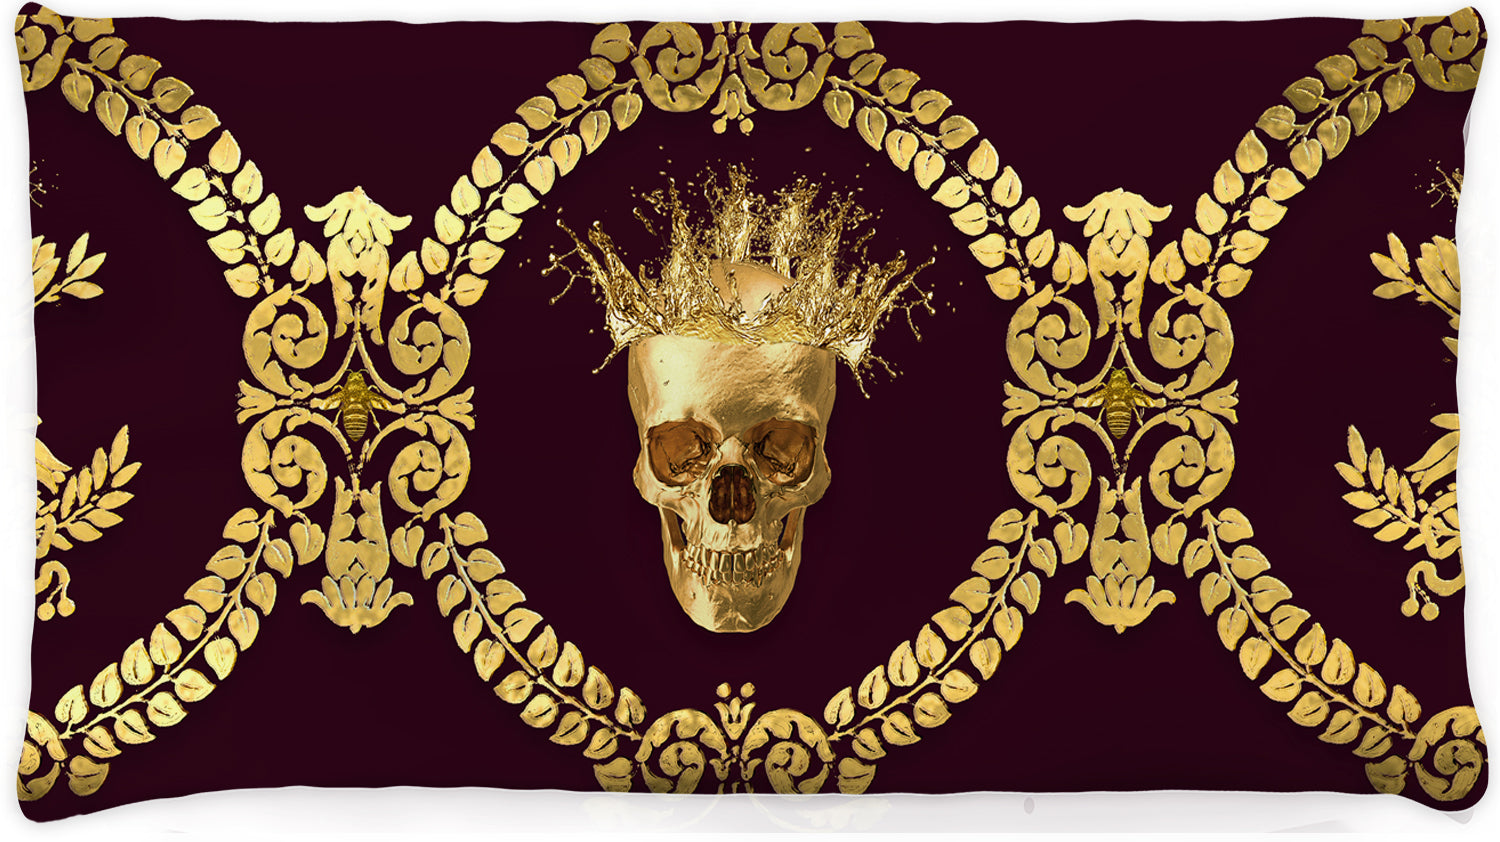 Caesar Gilded Skull & Bees- Singles & Body Pillow in Eggplant Wine | Le Leanian™ | The Photographist™